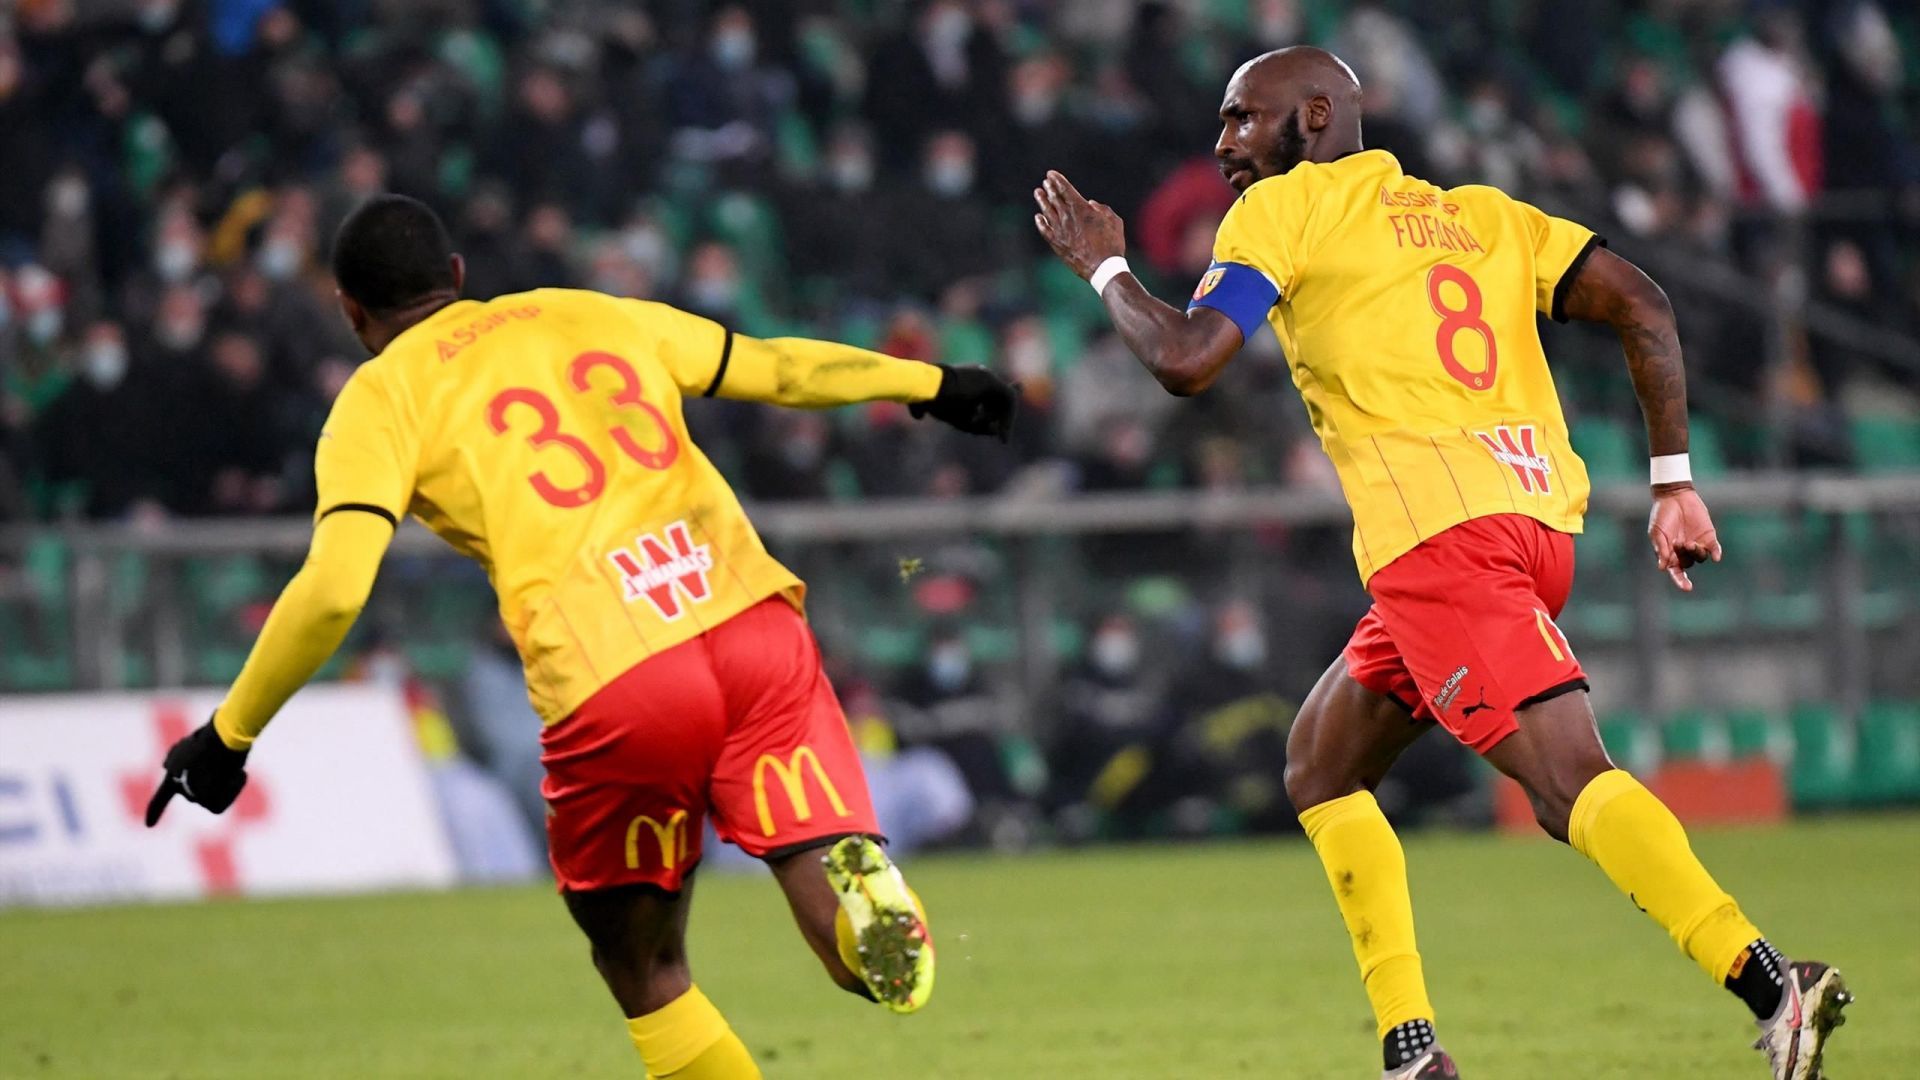 Lorient will host Lens on Sunday - Ligue 1